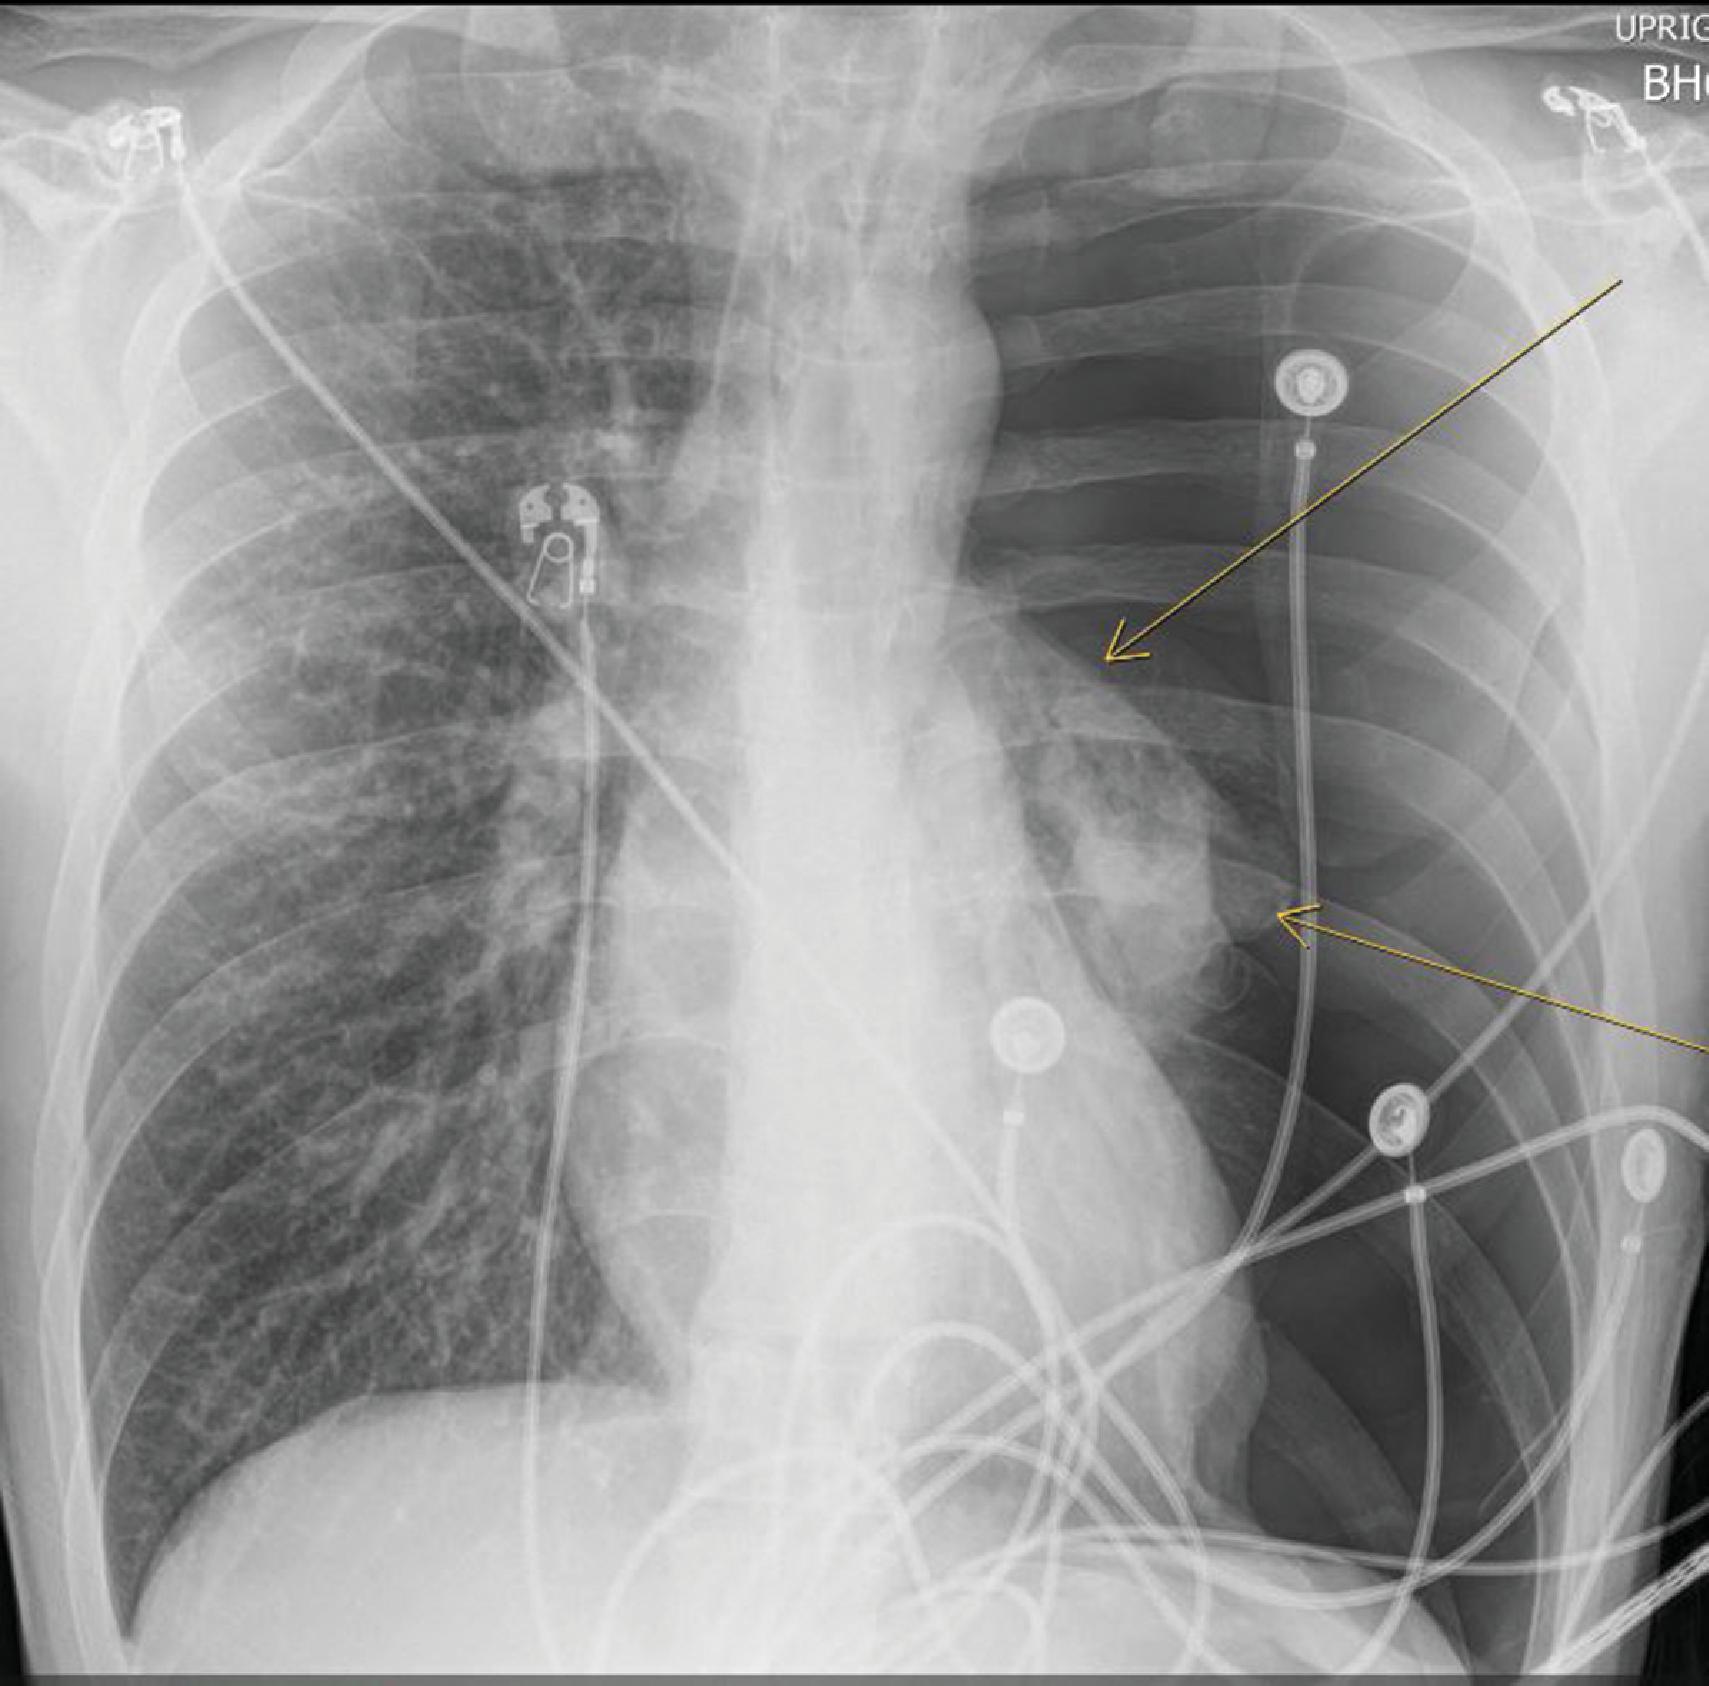 FIG. 3, Chest x-ray demonstrates a large left pneumothorax with complete collapse of the lung and evidence of mild tension with shift of the mediastinum and slight depression of the diaphragm in a patient with a spontaneous pneumothorax.